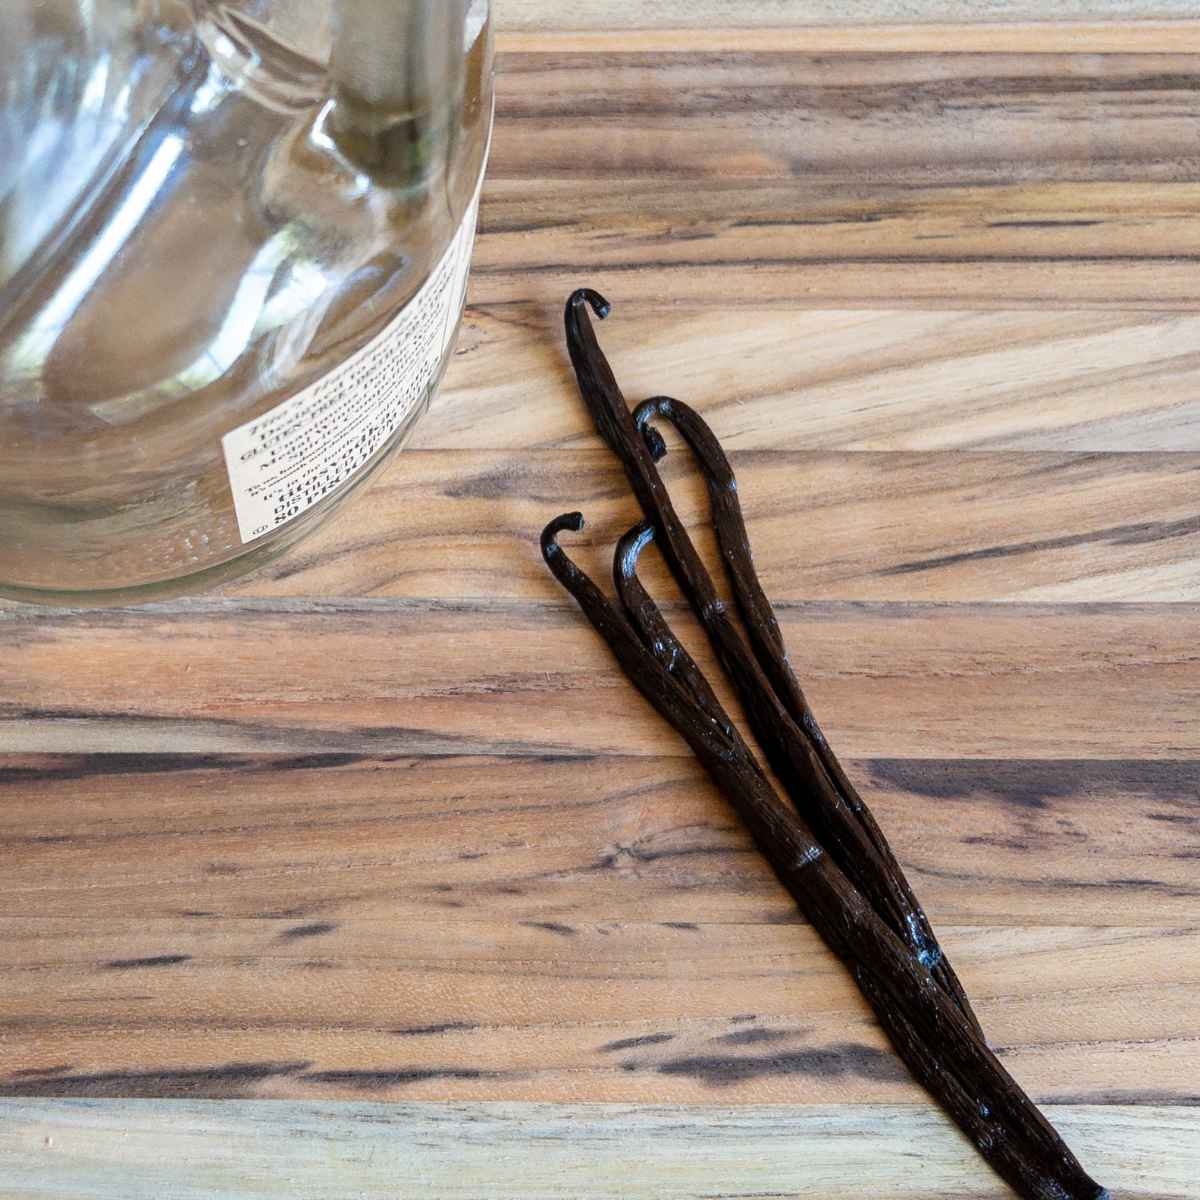 madagascar vanilla beans on a cutting board next to an empty bottle of vodka